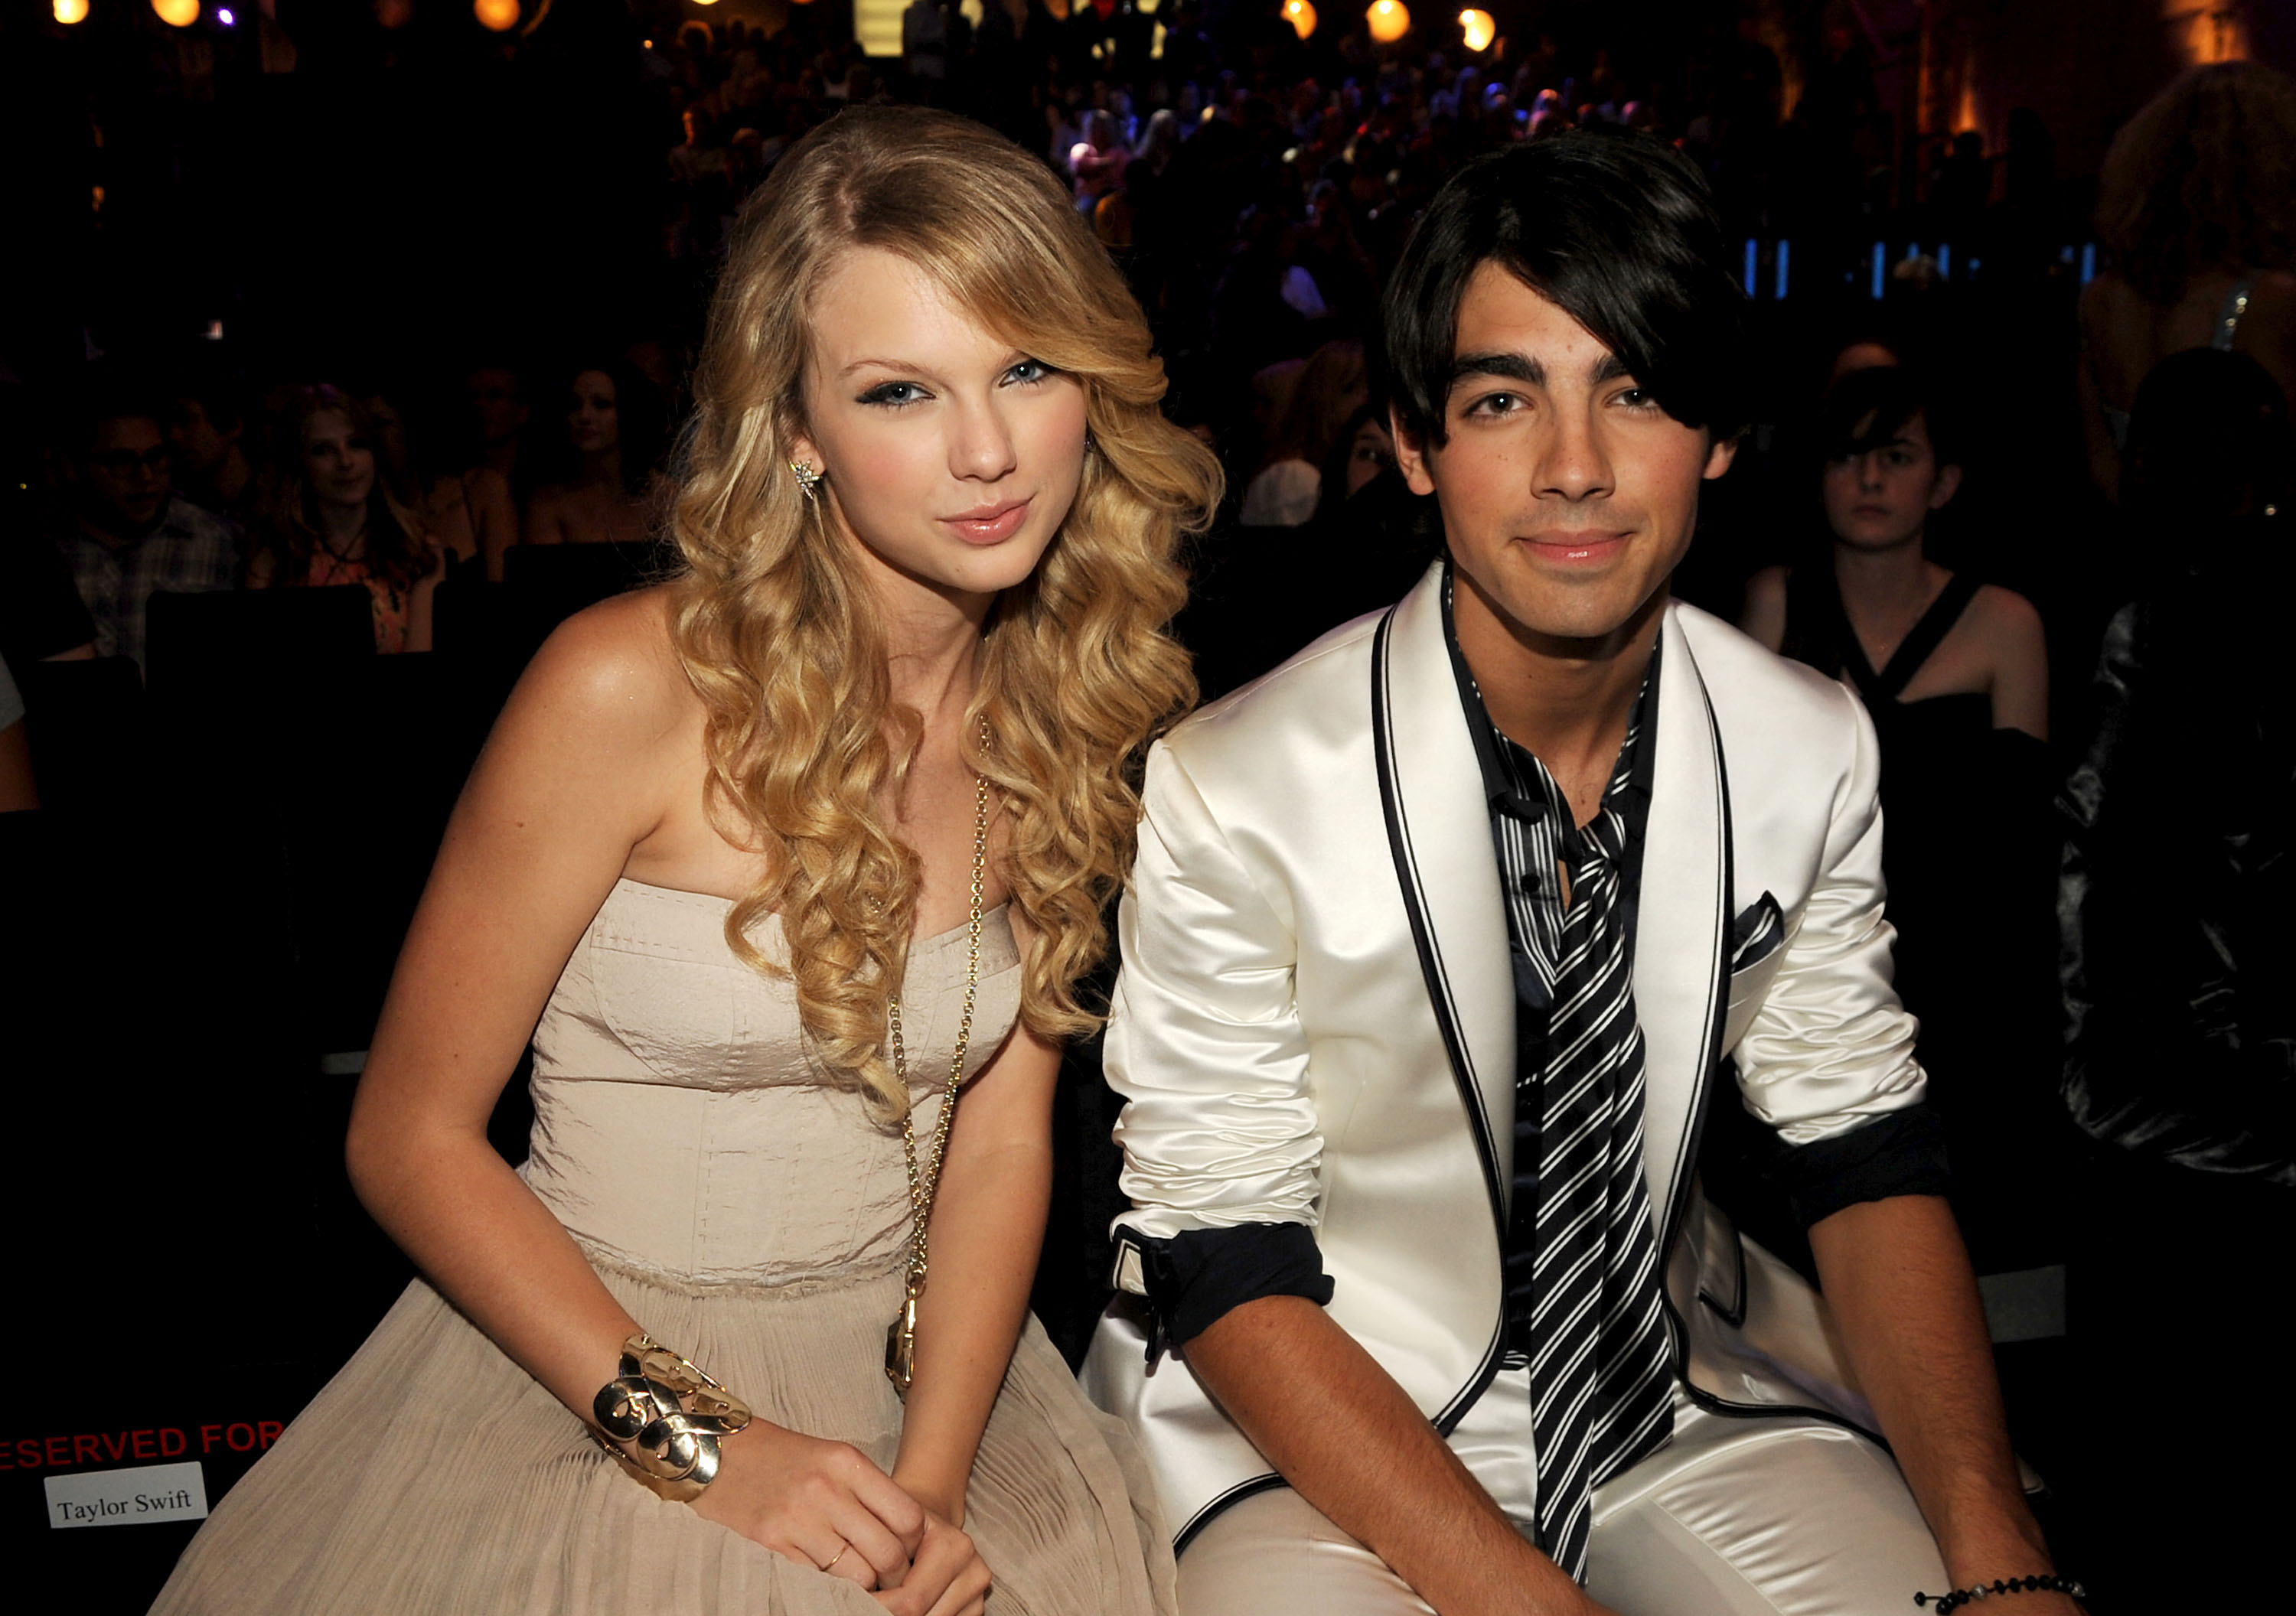 Taylor and Joe sitting together